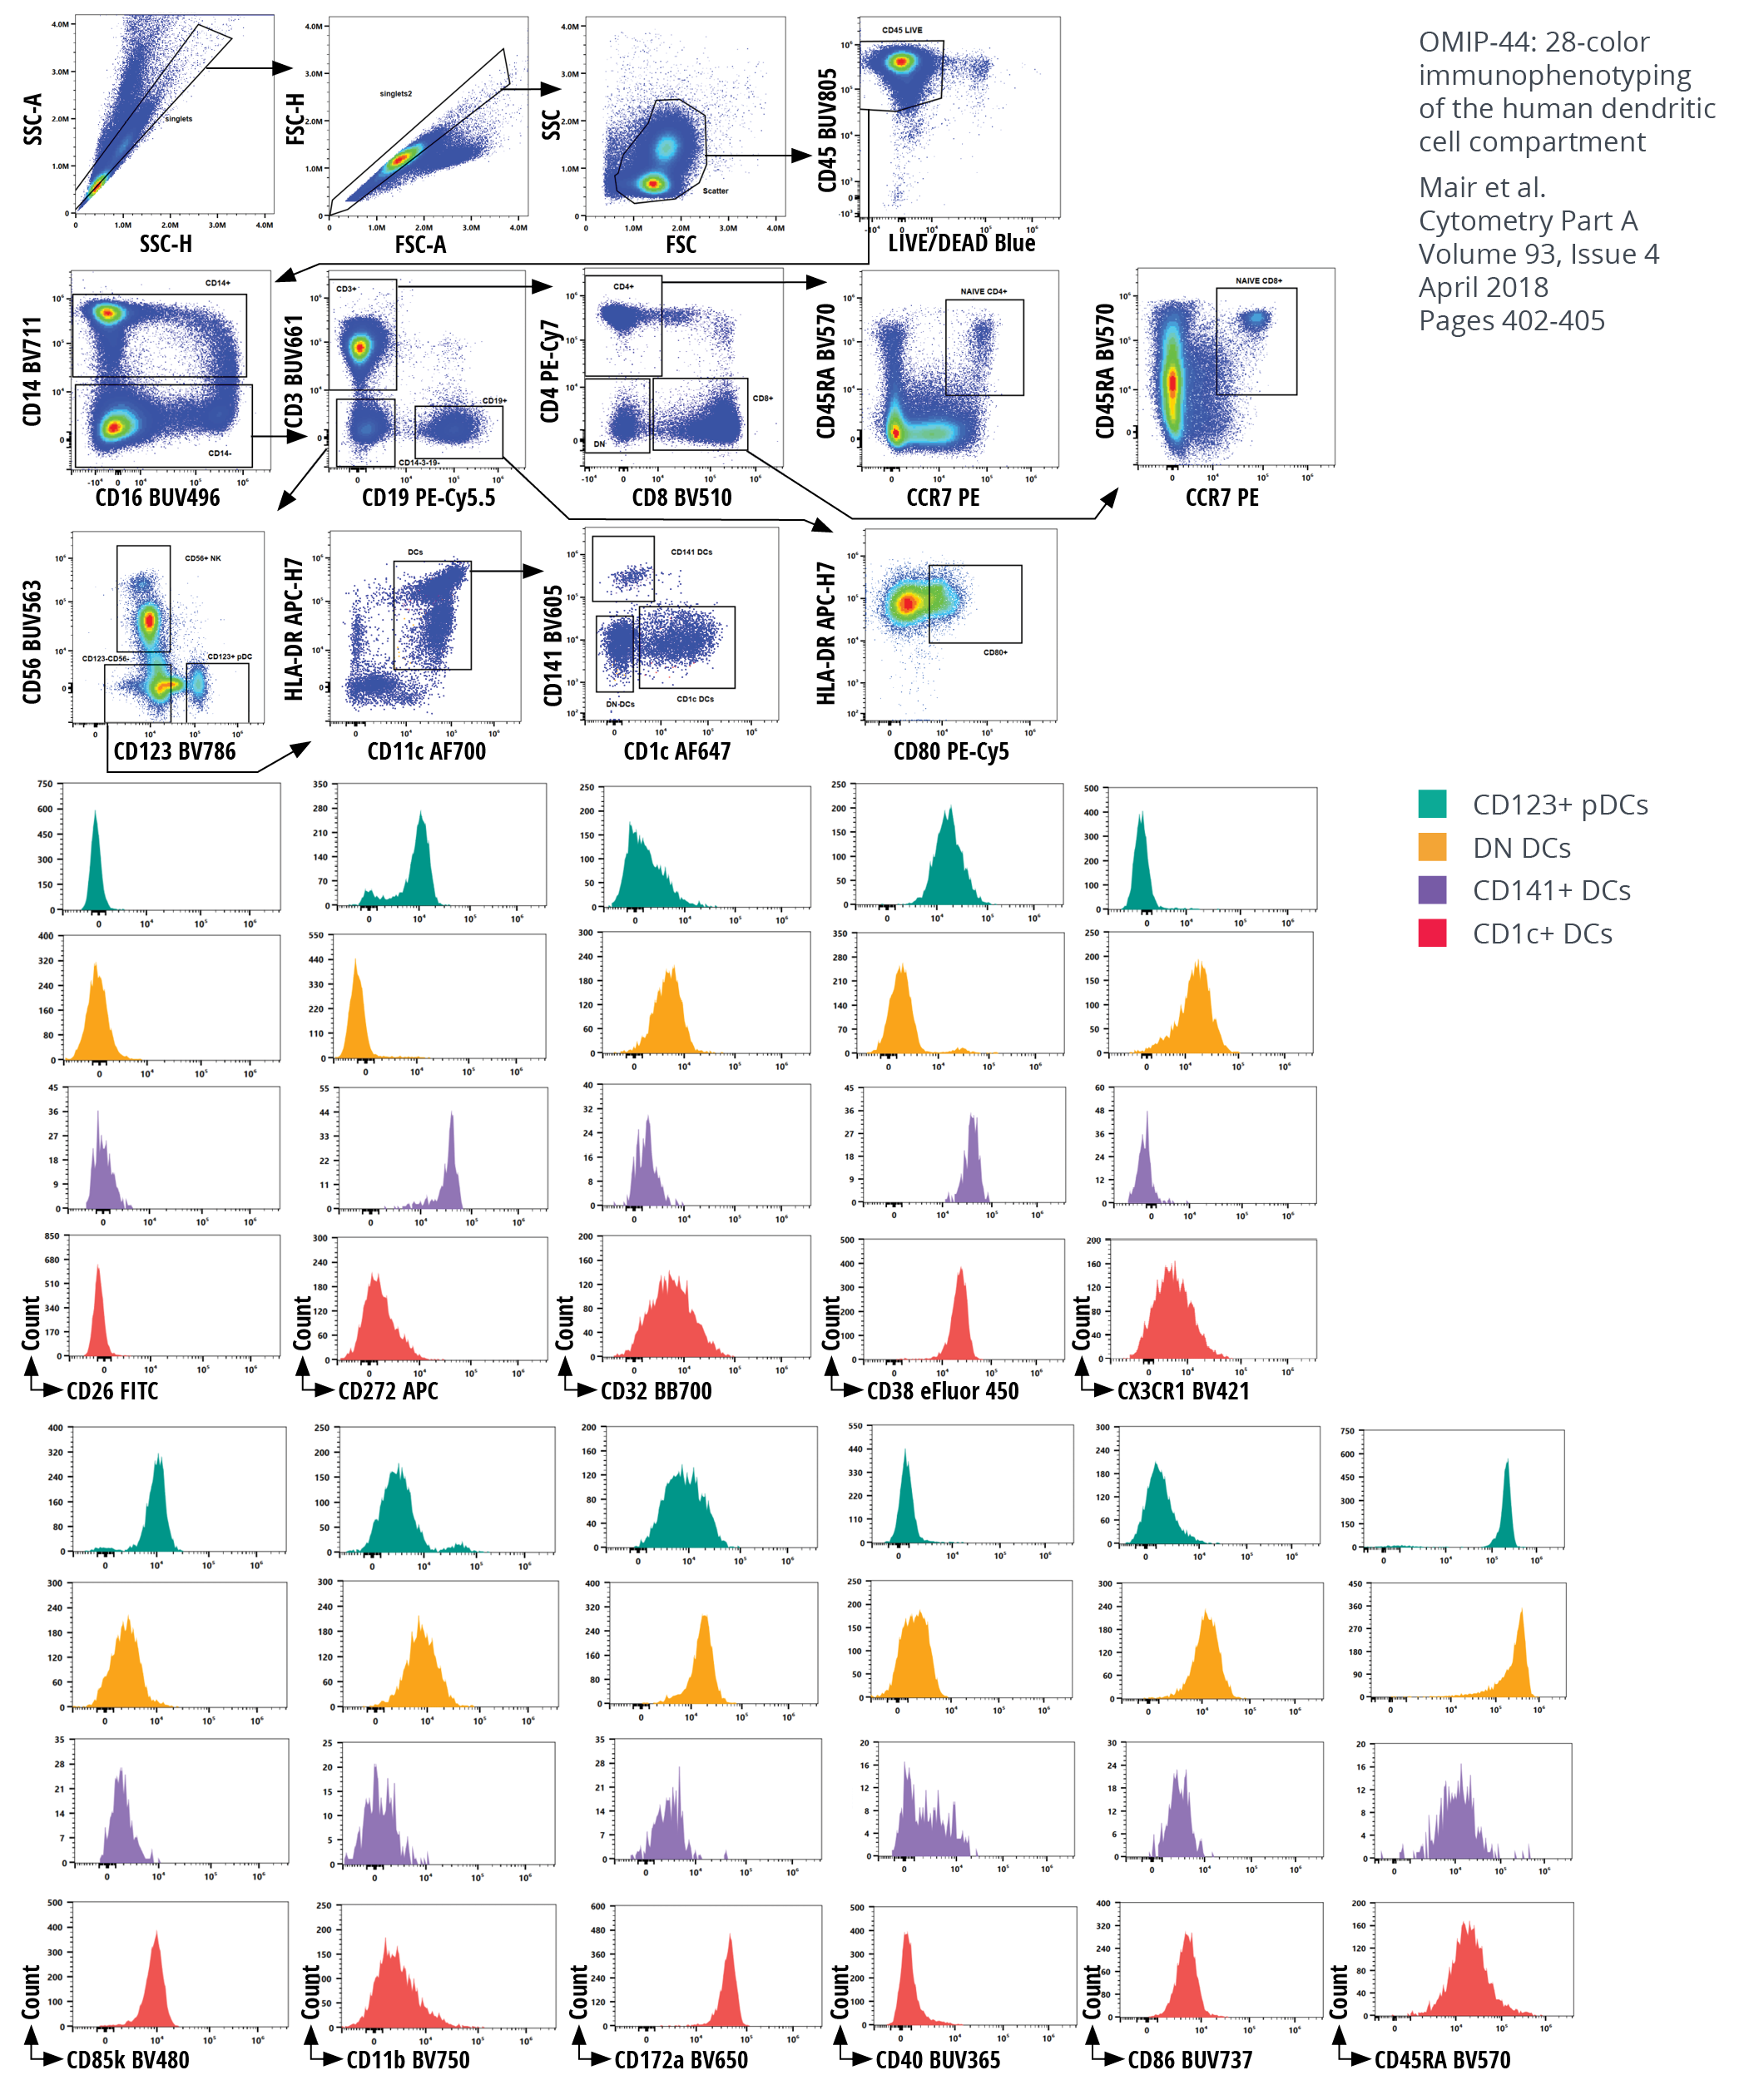 spectral flow cytometry